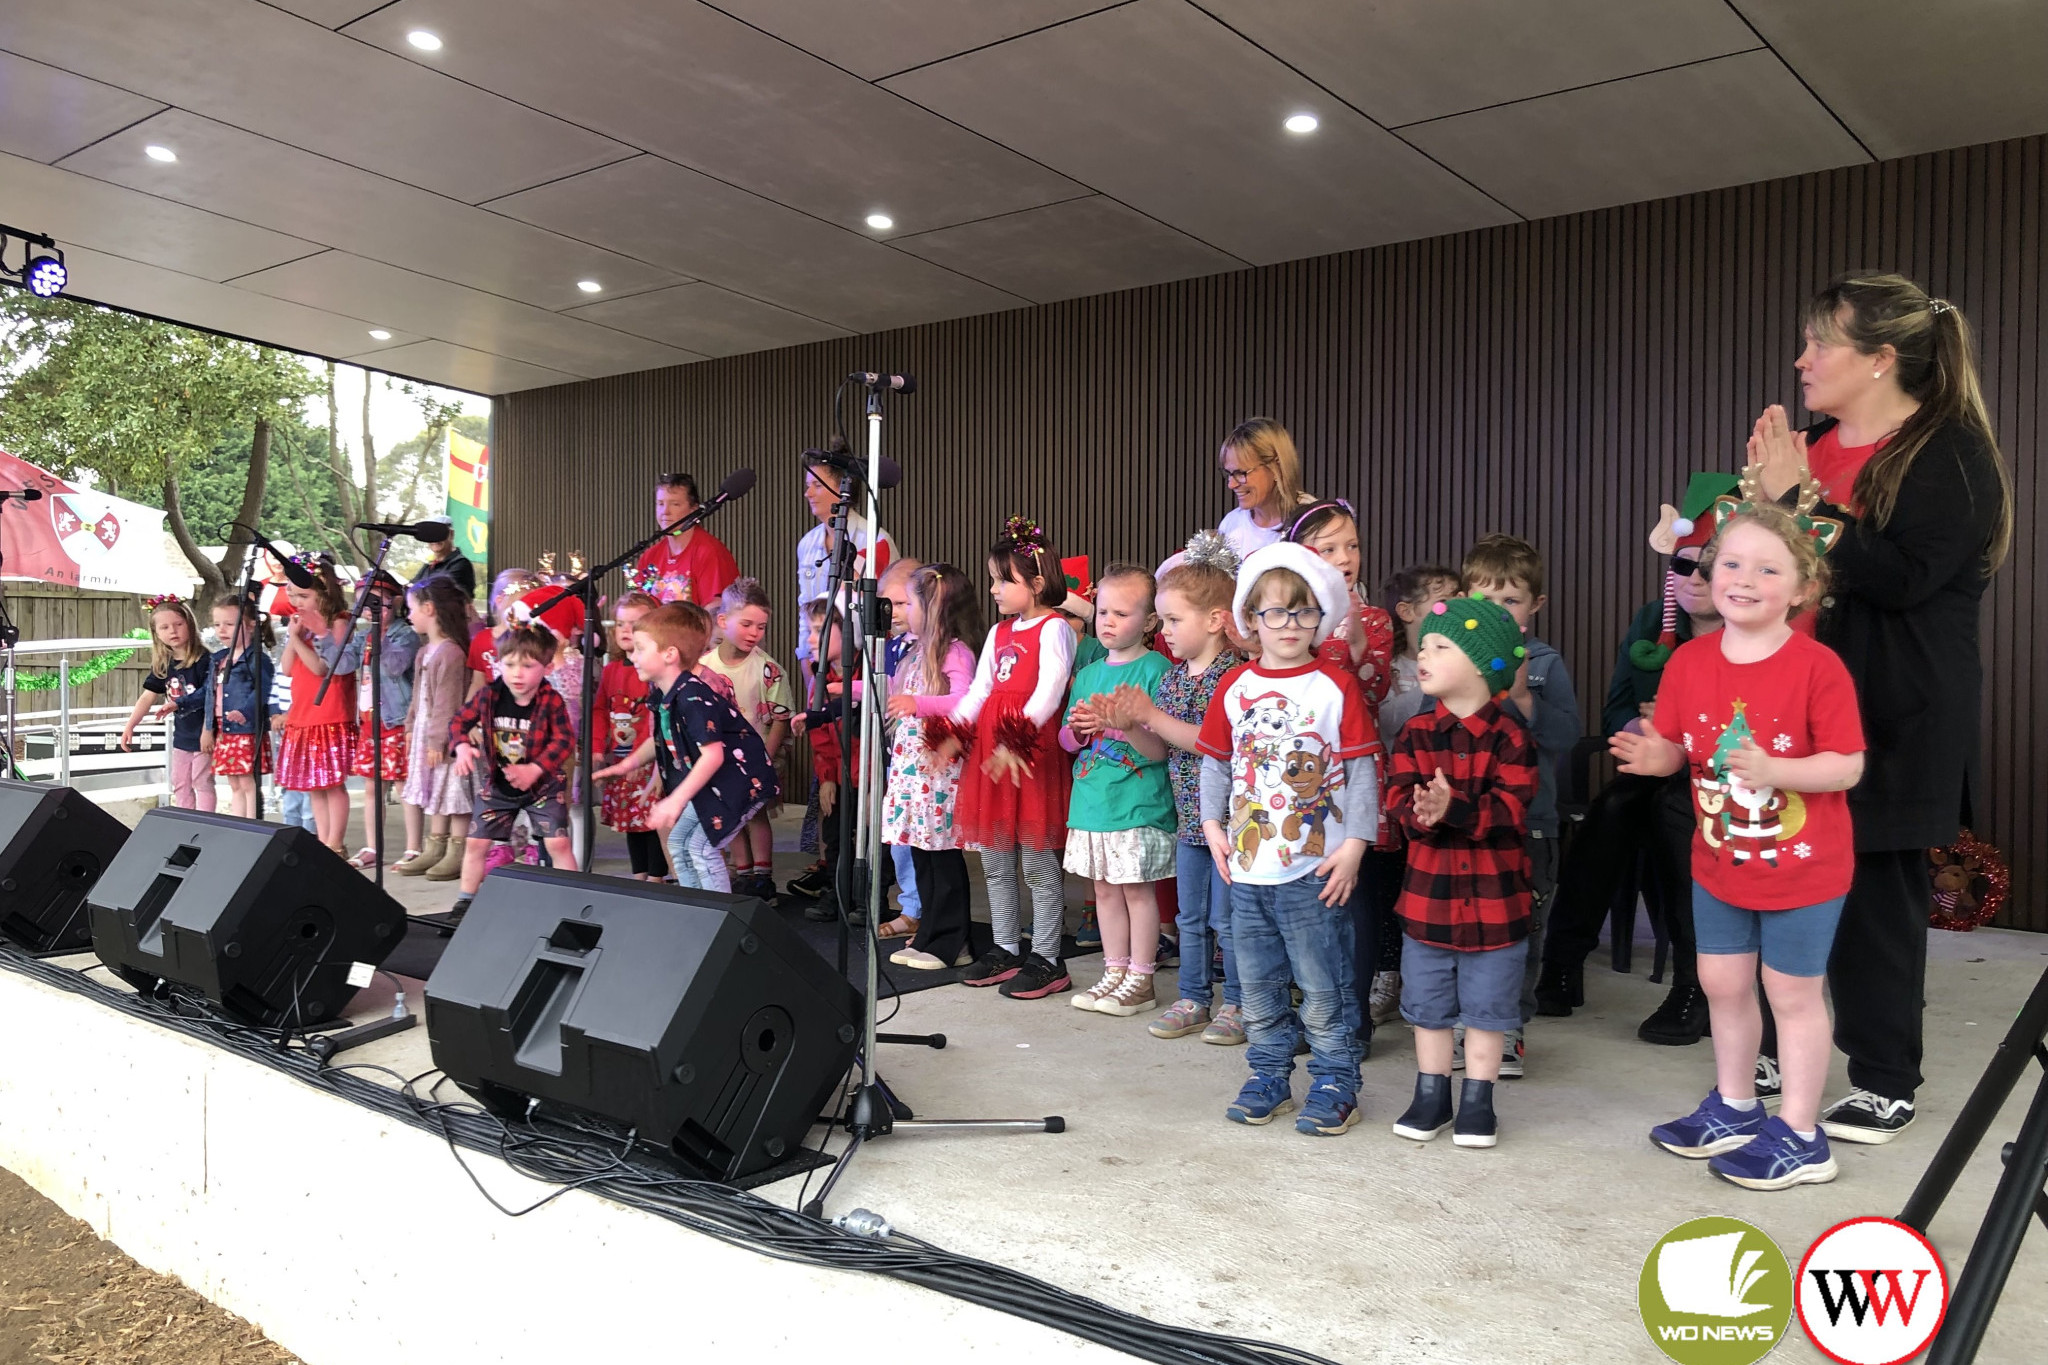 Koroit gets festive at ‘Carols at the Stage’ - feature photo